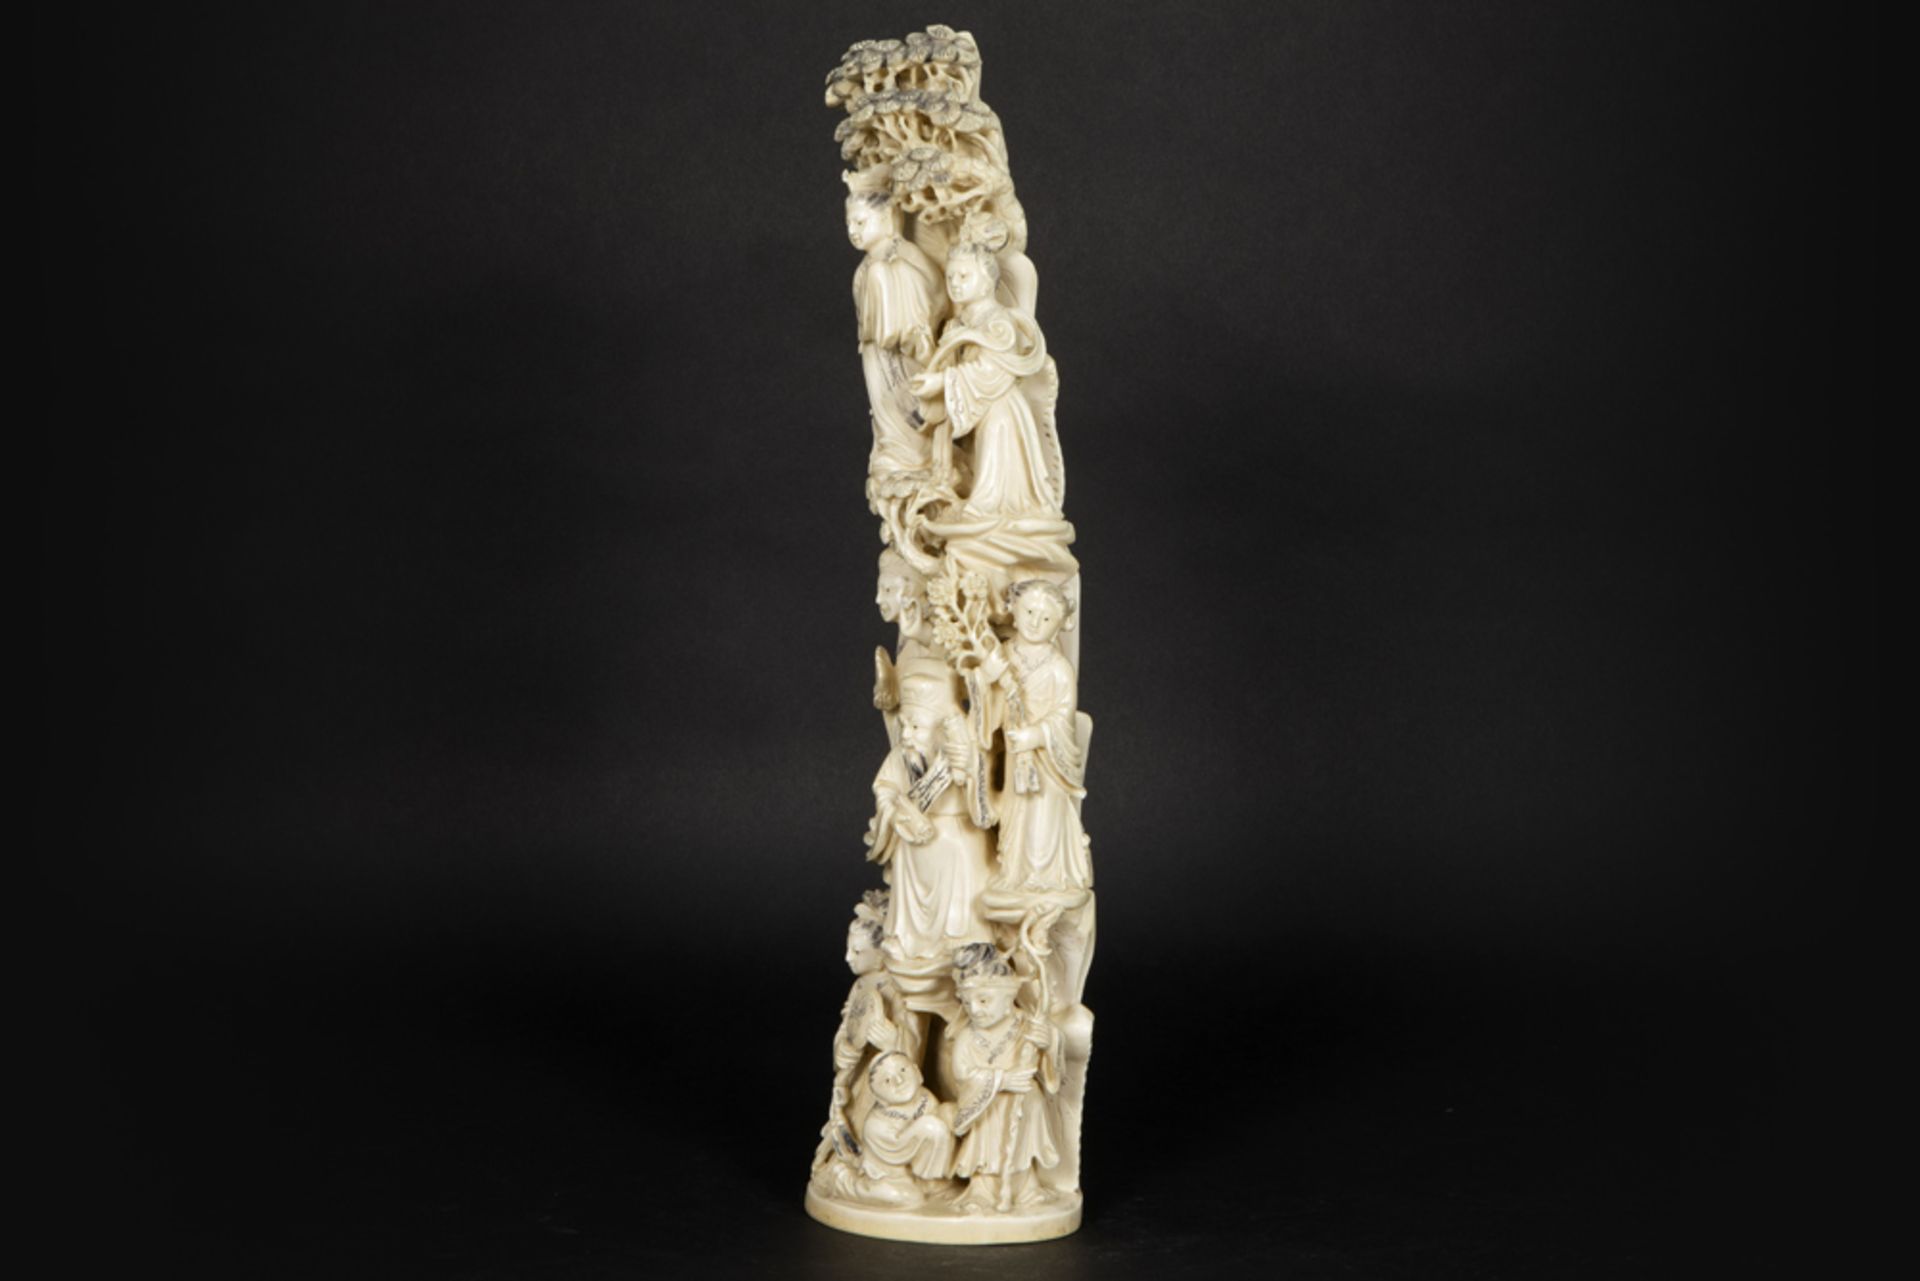 quite big 'antique' Chinese sculpture in ivory depicting a courtly scene with eight figures - ca - Image 2 of 6